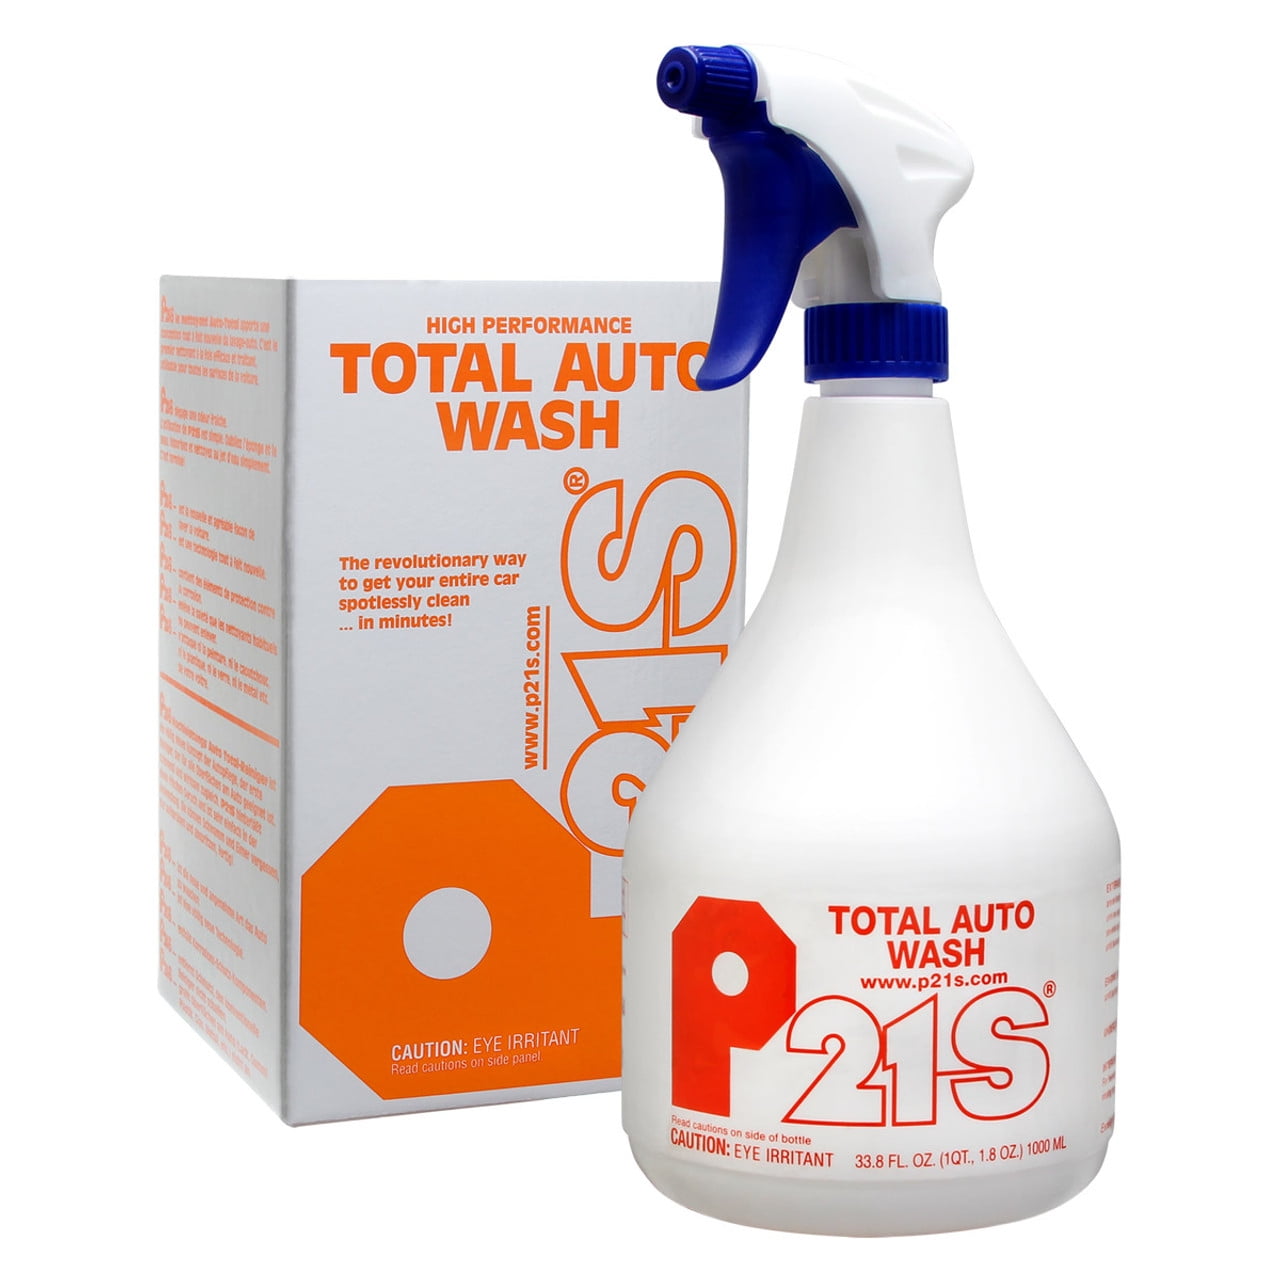 P21s Total Auto Wash 1000ml With Sprayer 70-353900-1 for sale online